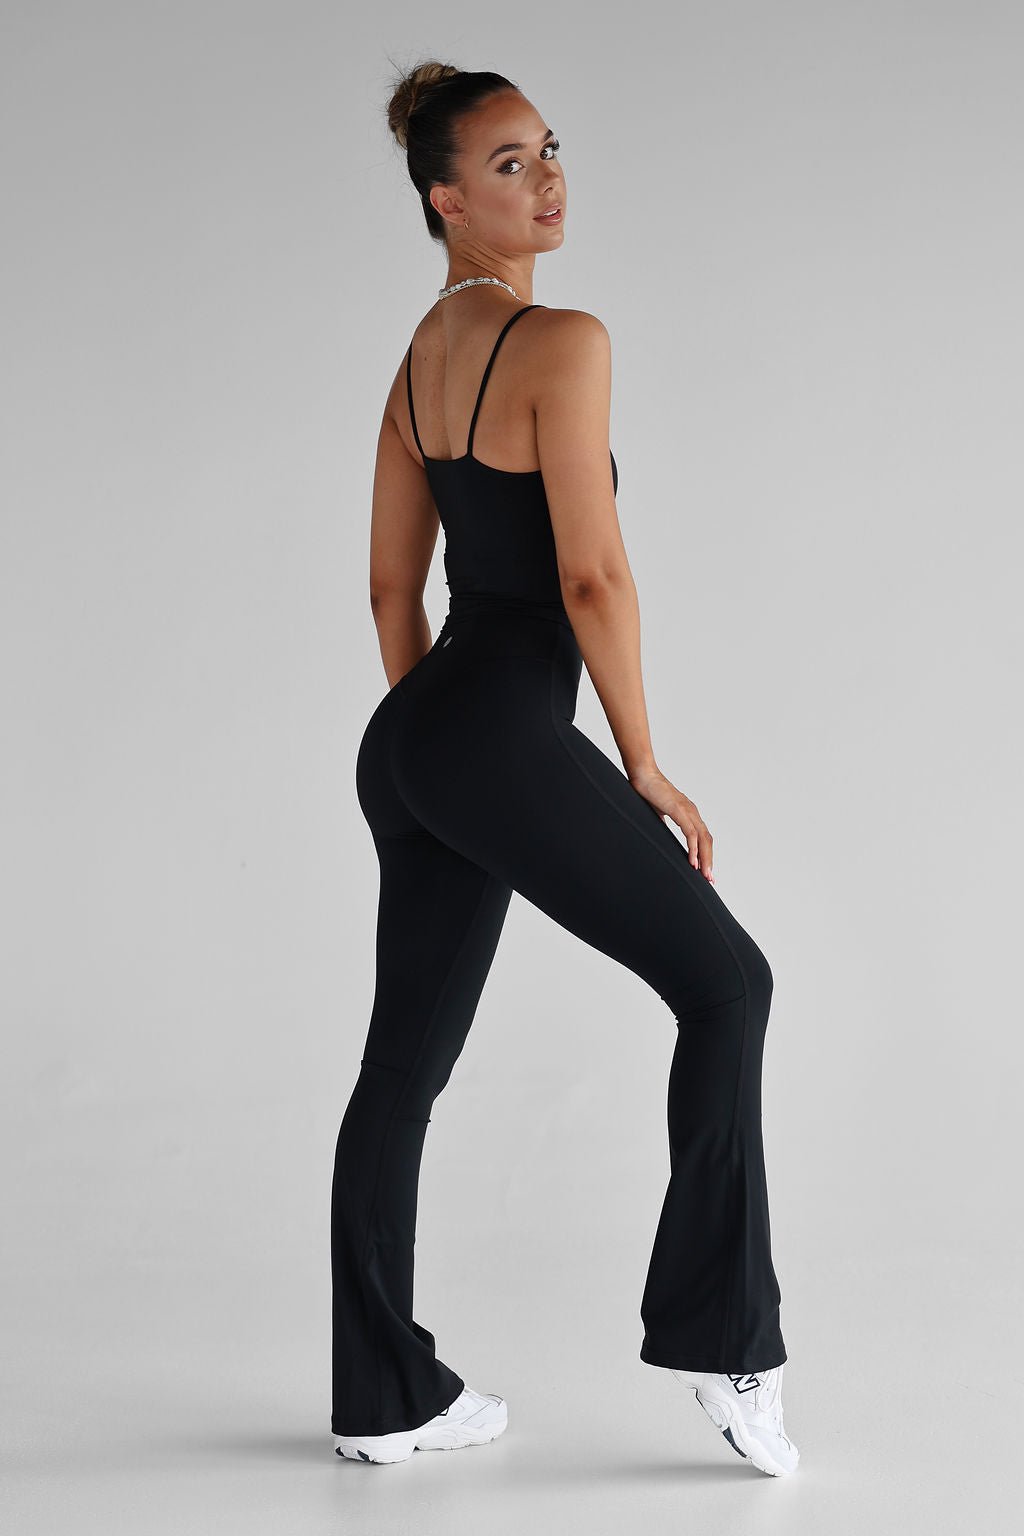 SCULPT Flare Leggings - Black, High Waisted, Squat Proof, 5 Star Rated